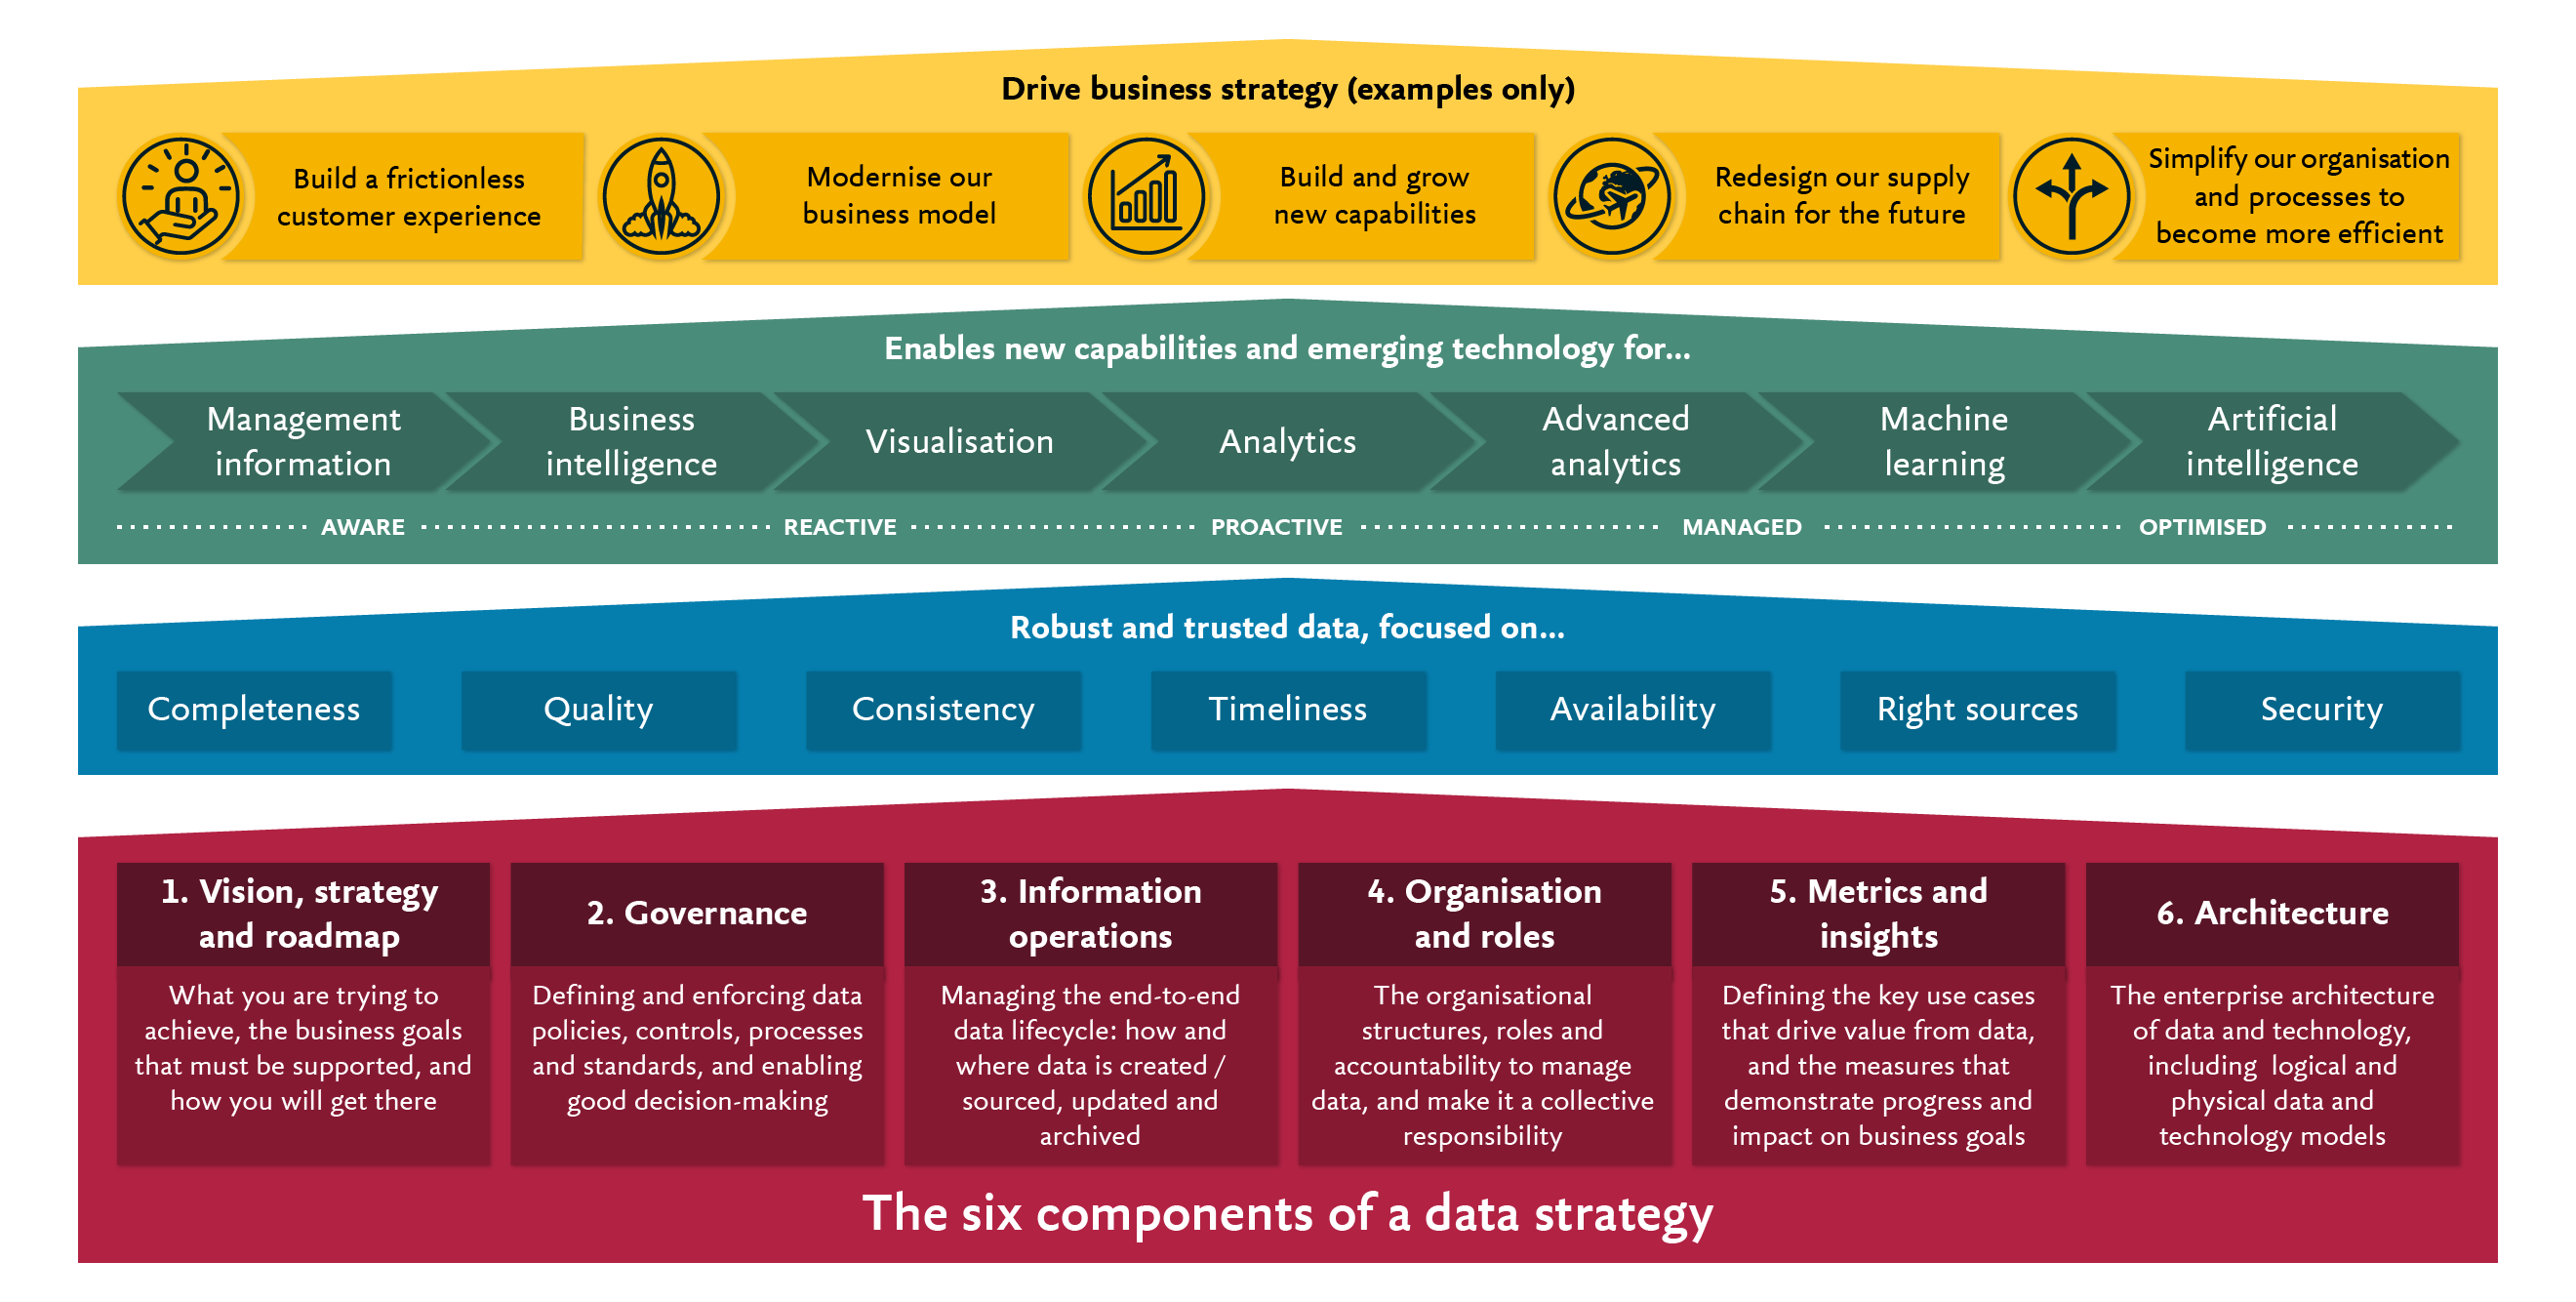 Infographic illustrating the six key components of a data strategy